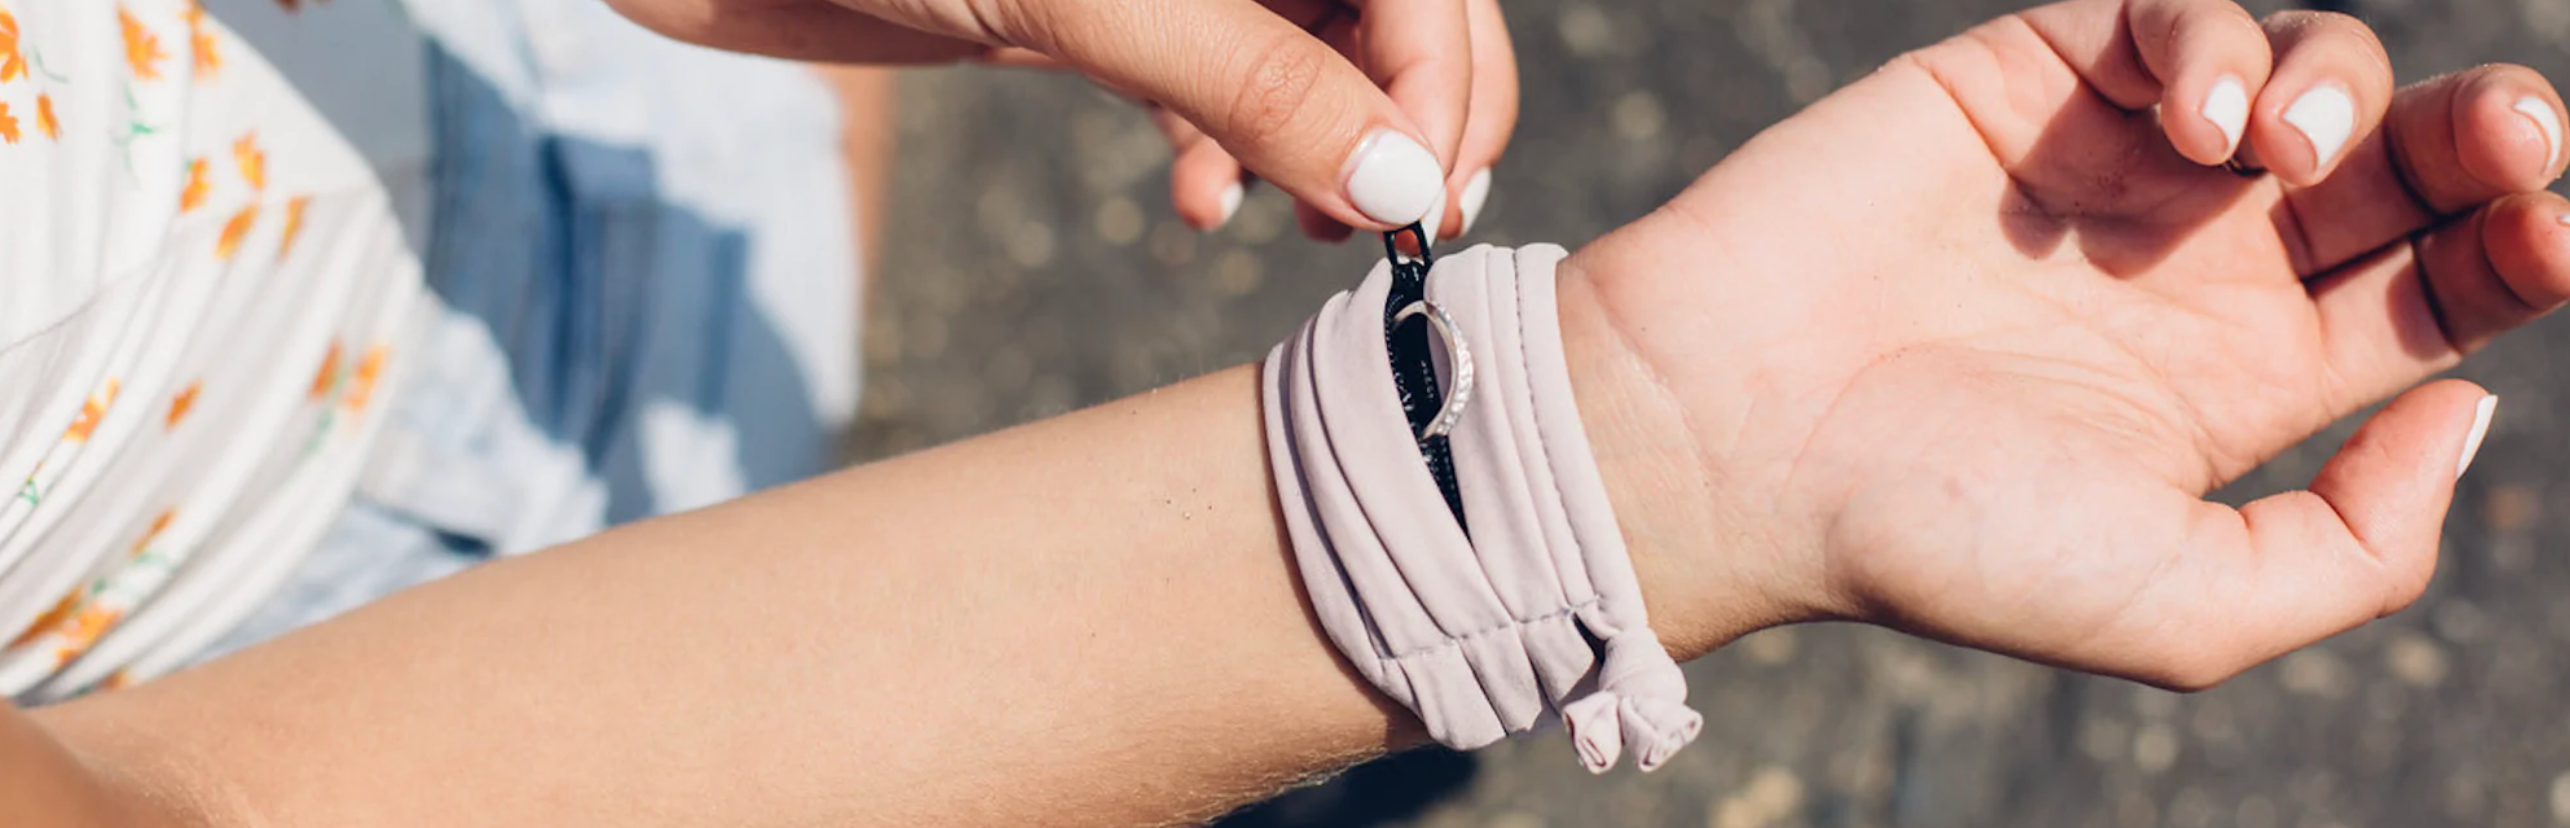 A arm band that looks similar to a scrunchie that has hidden pockets to hold things like rings, keys or anything little